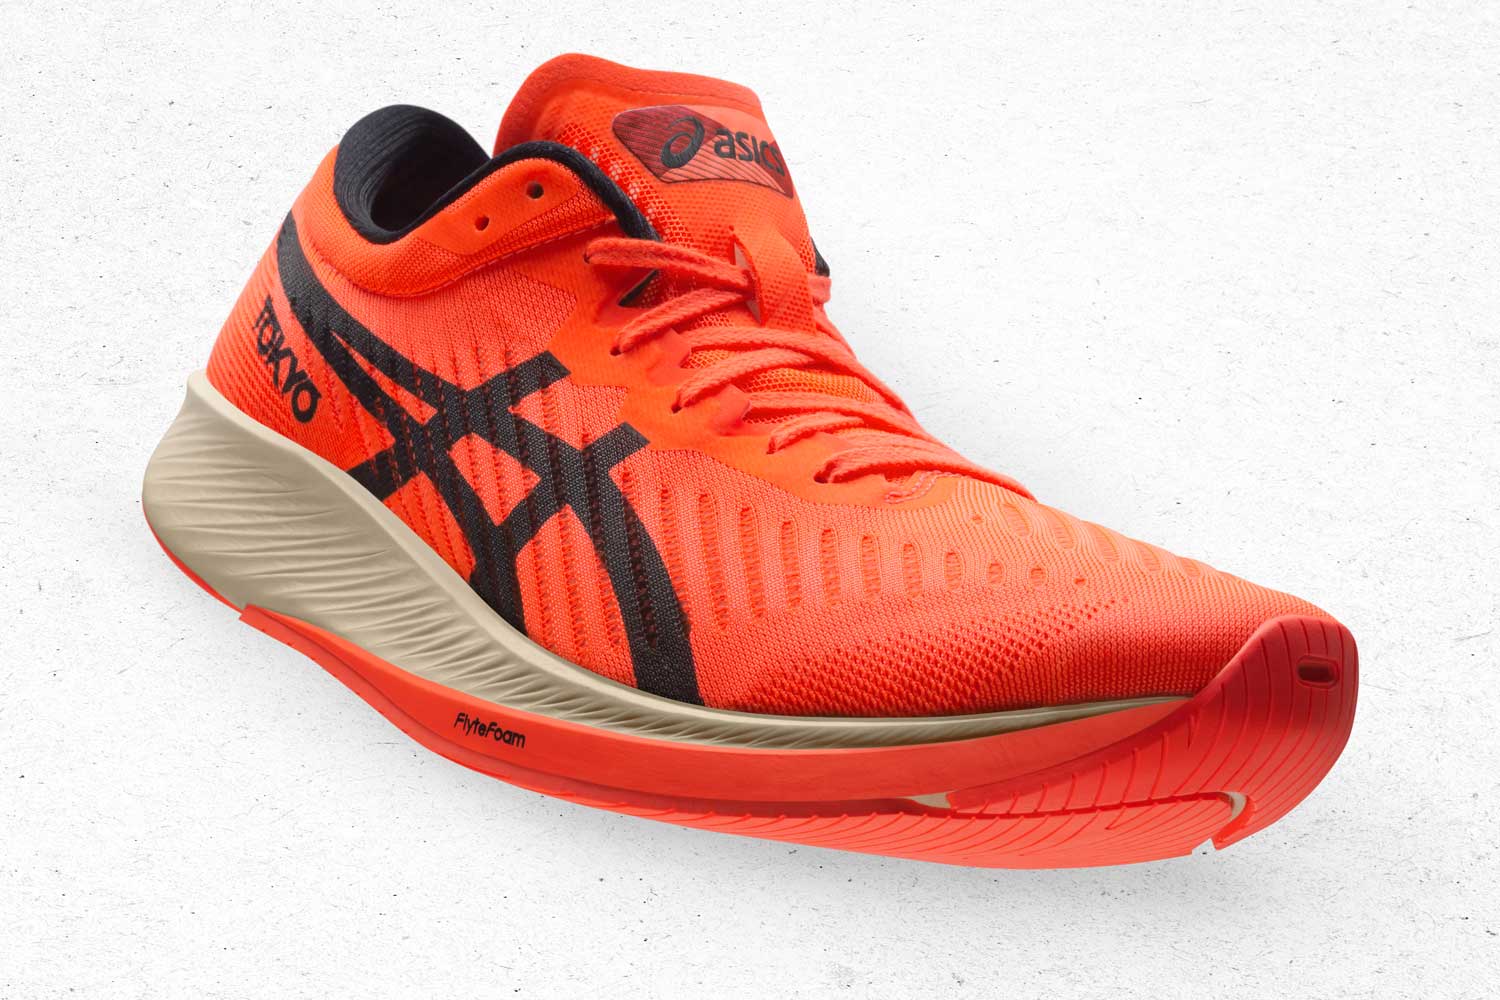 ASICS new Meta range sports shoes with more bounce and speed